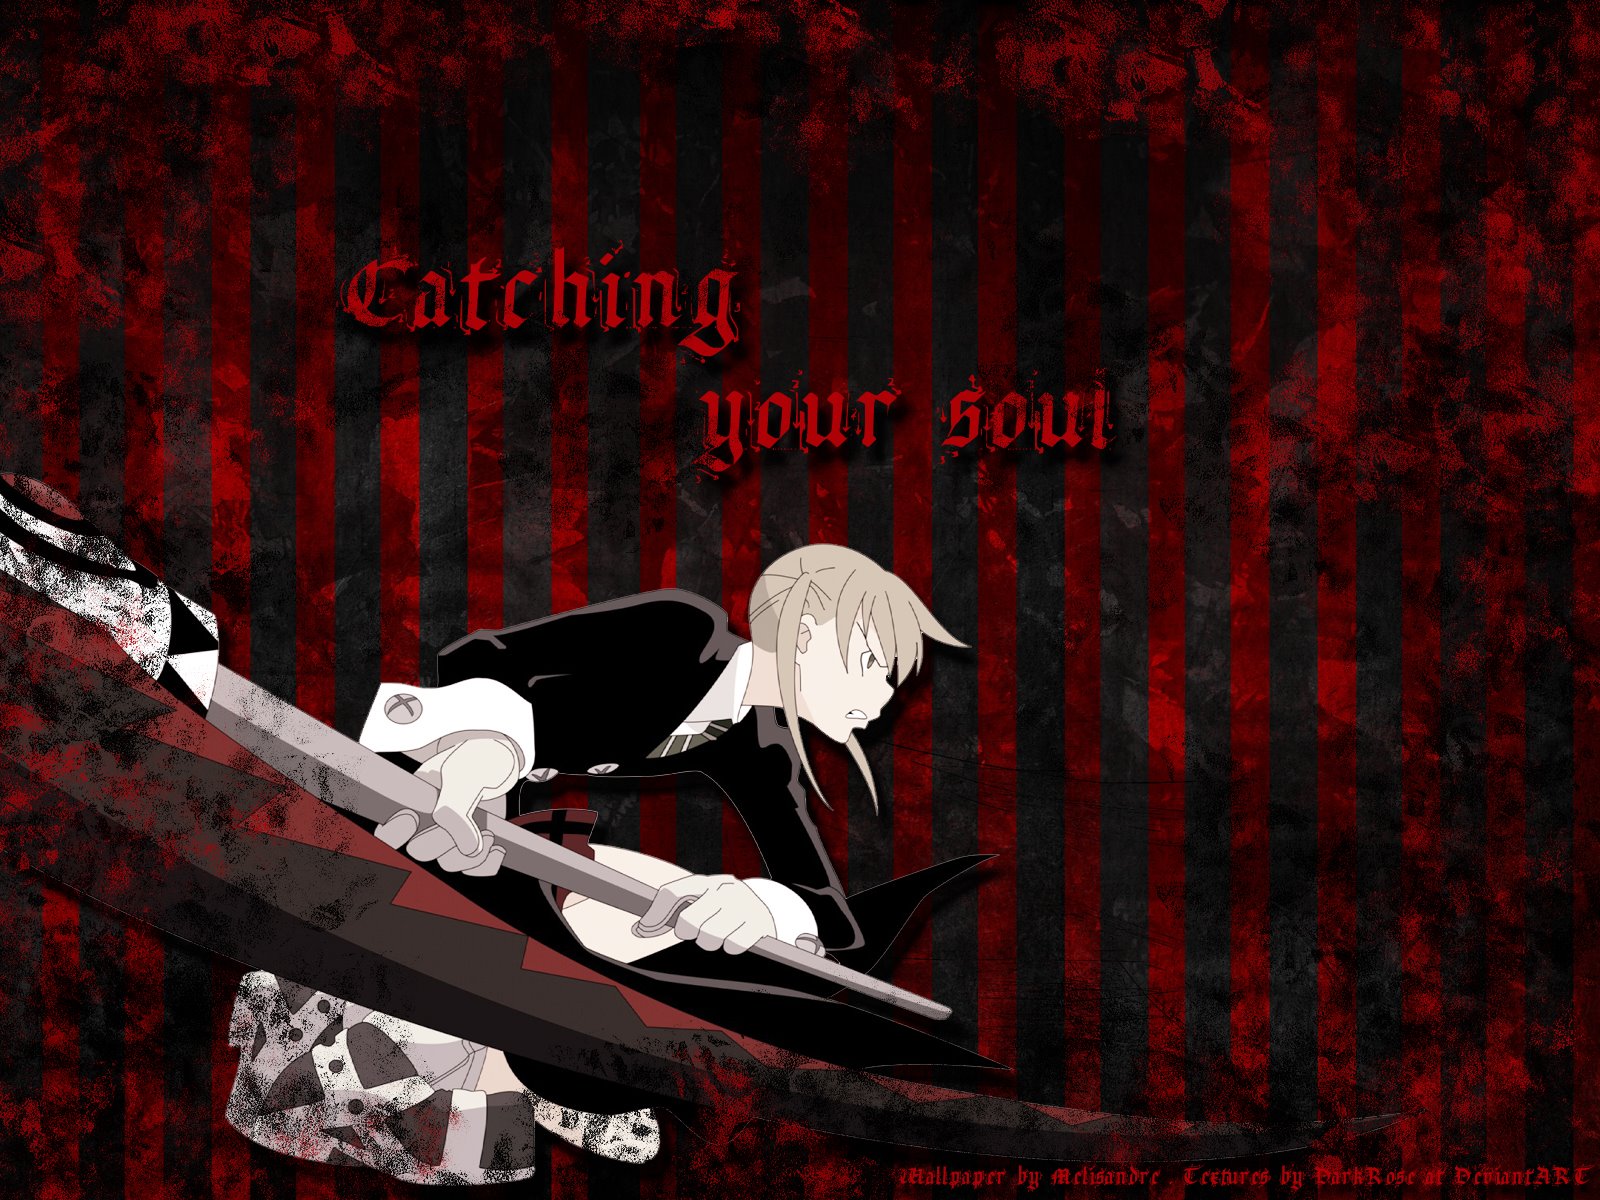 [catching+your+soul.jpg]